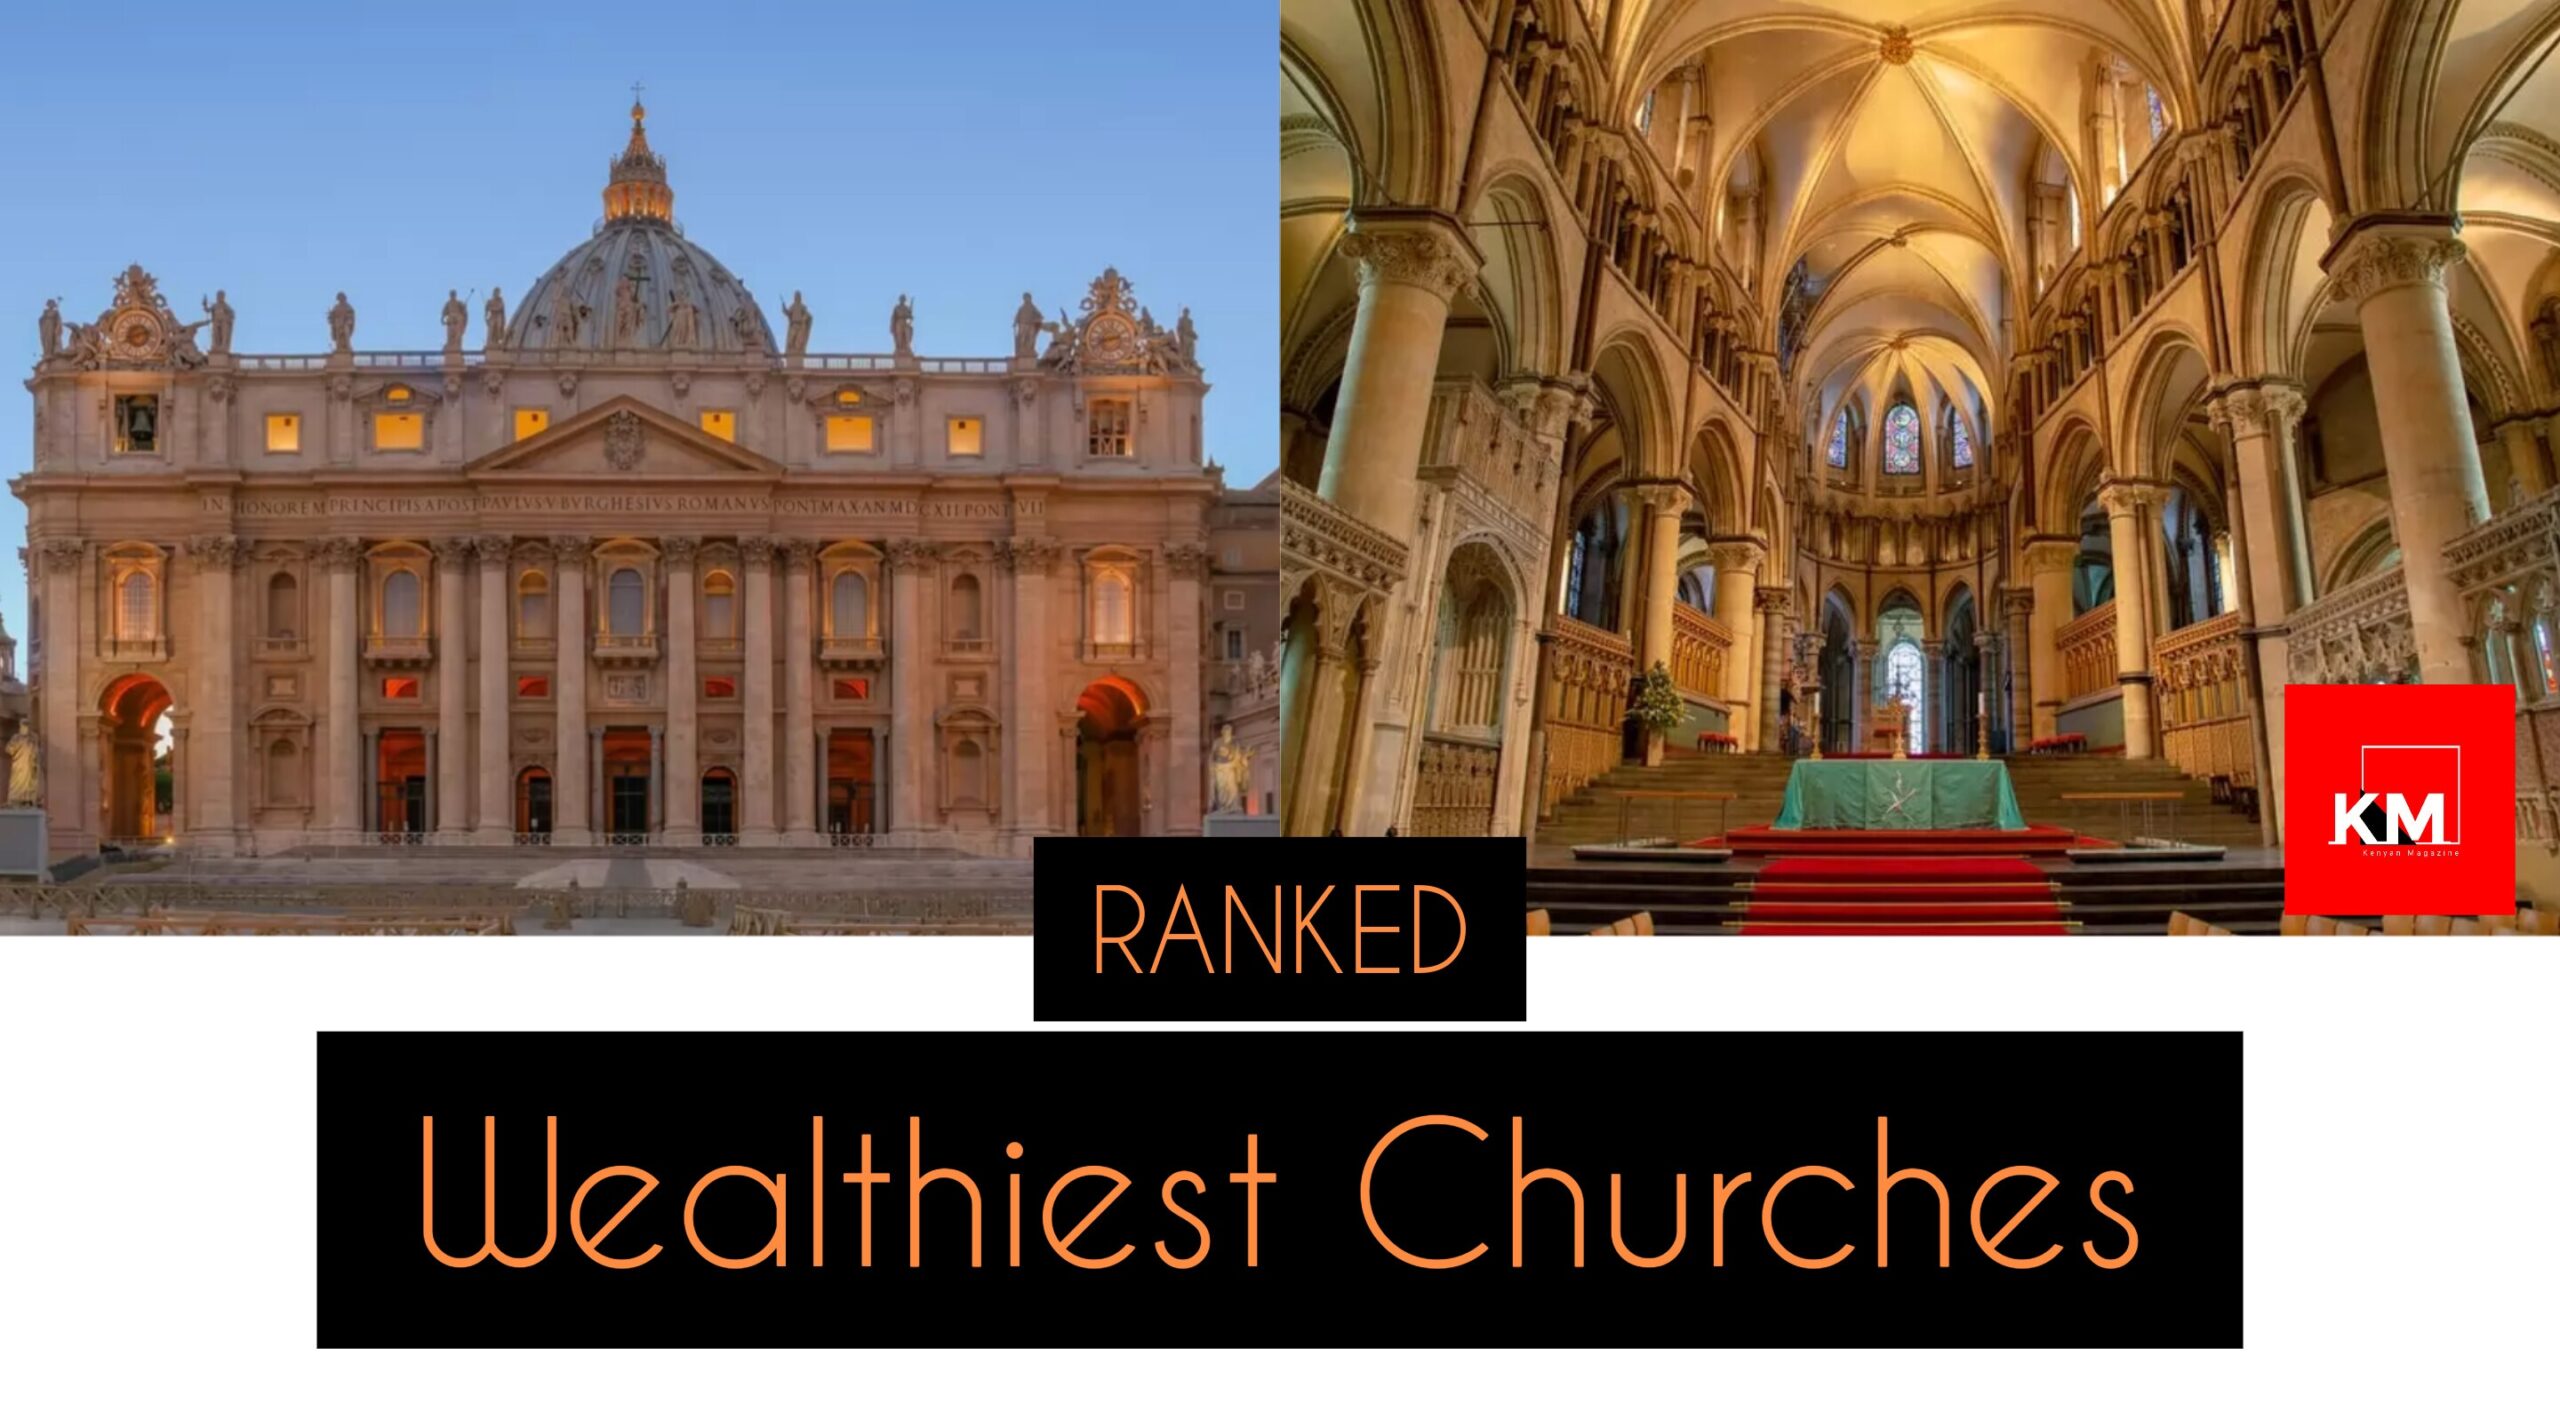 Wealthiest Churches in the world